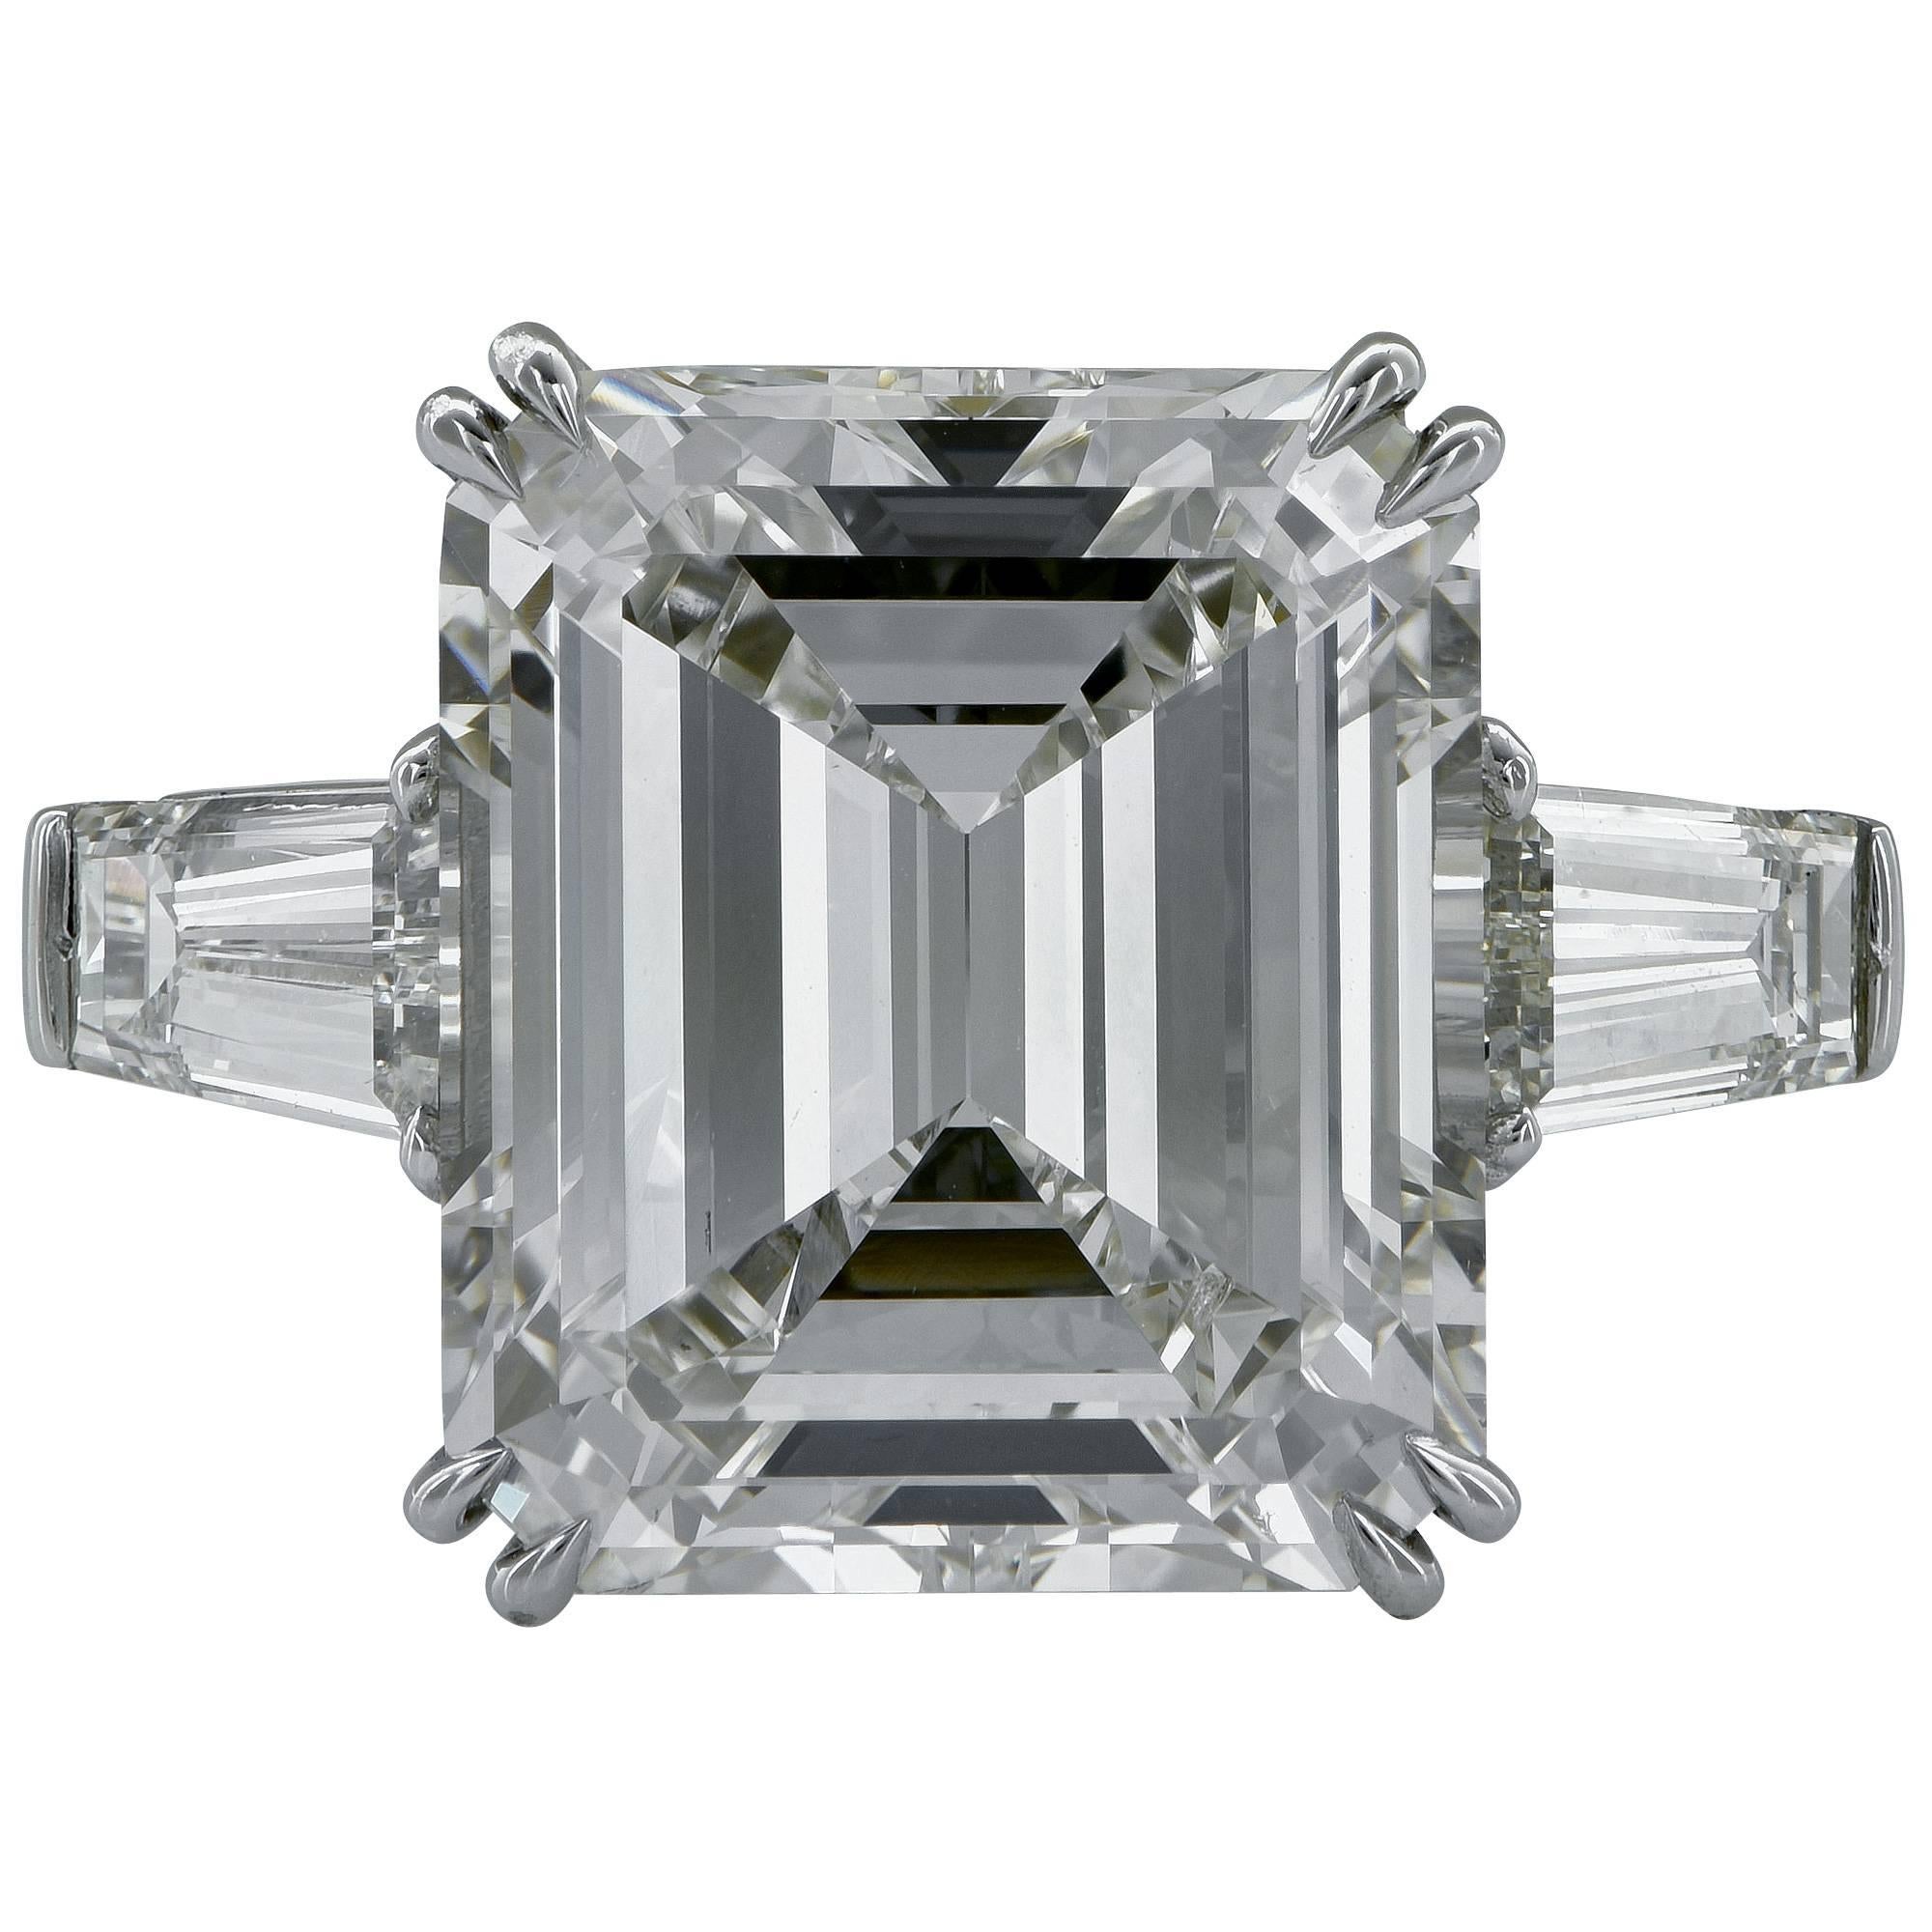 This stunning platinum handmade ring features a 9.17ct emerald cut diamond K color and VS1 clarity and is flanked by 2 tapered baguettes weighing 1.63ct total J color and VS clarity.

This ring is a size 6.25 and can be sized up or down.
It is